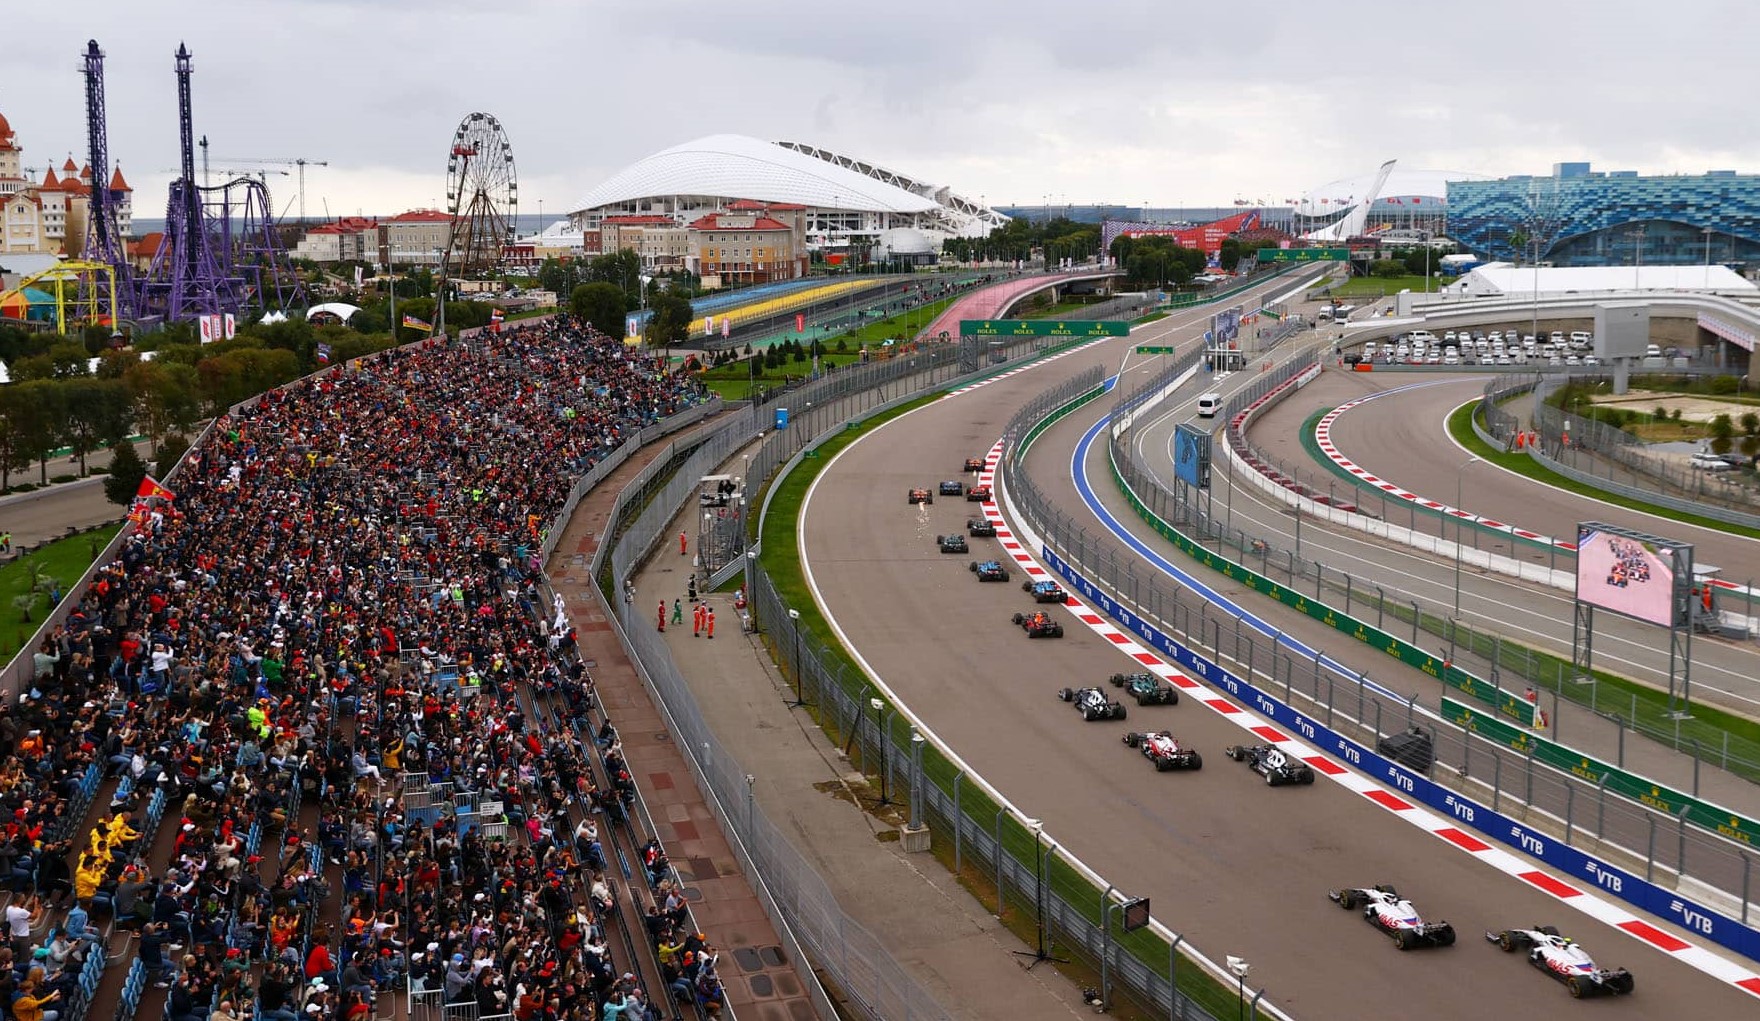 Russian Grand Prix organisers promise to take legal action after race was canceled